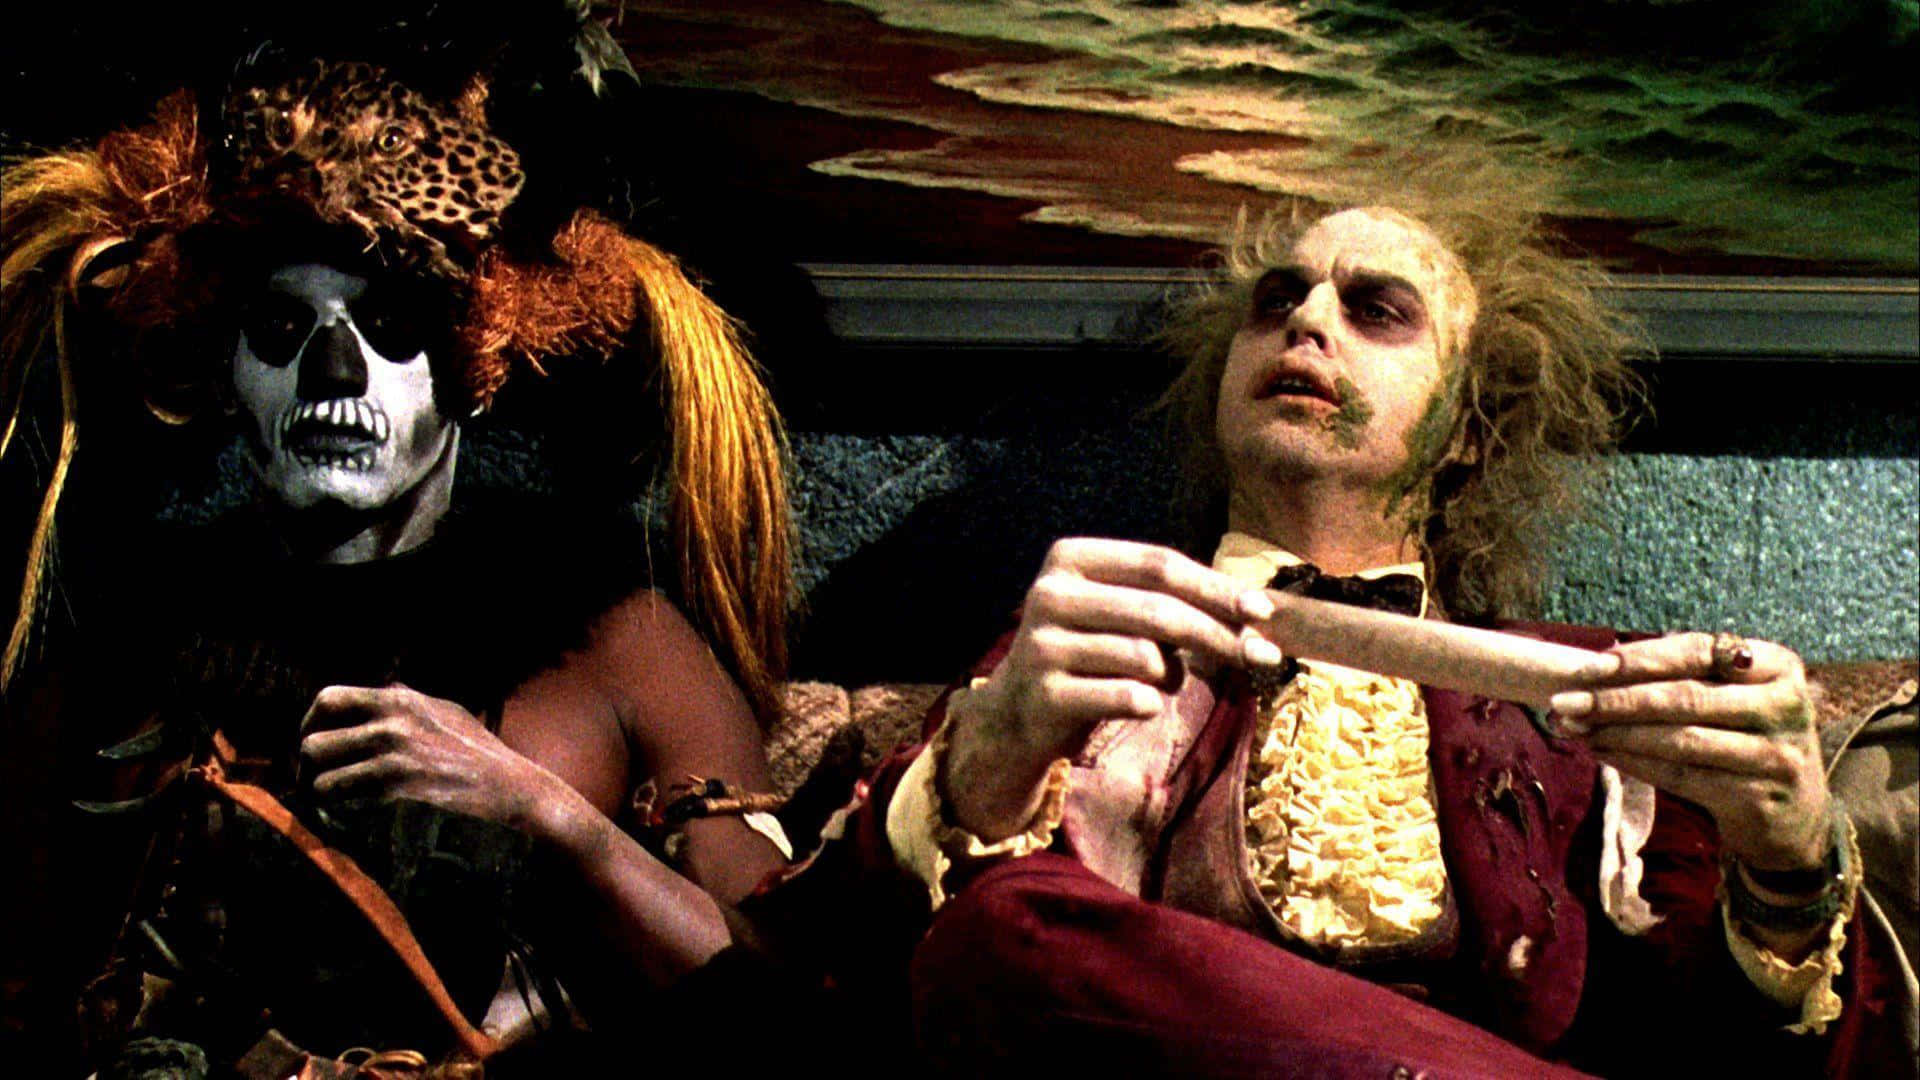 Join the Afterlife with Beetlejuice!